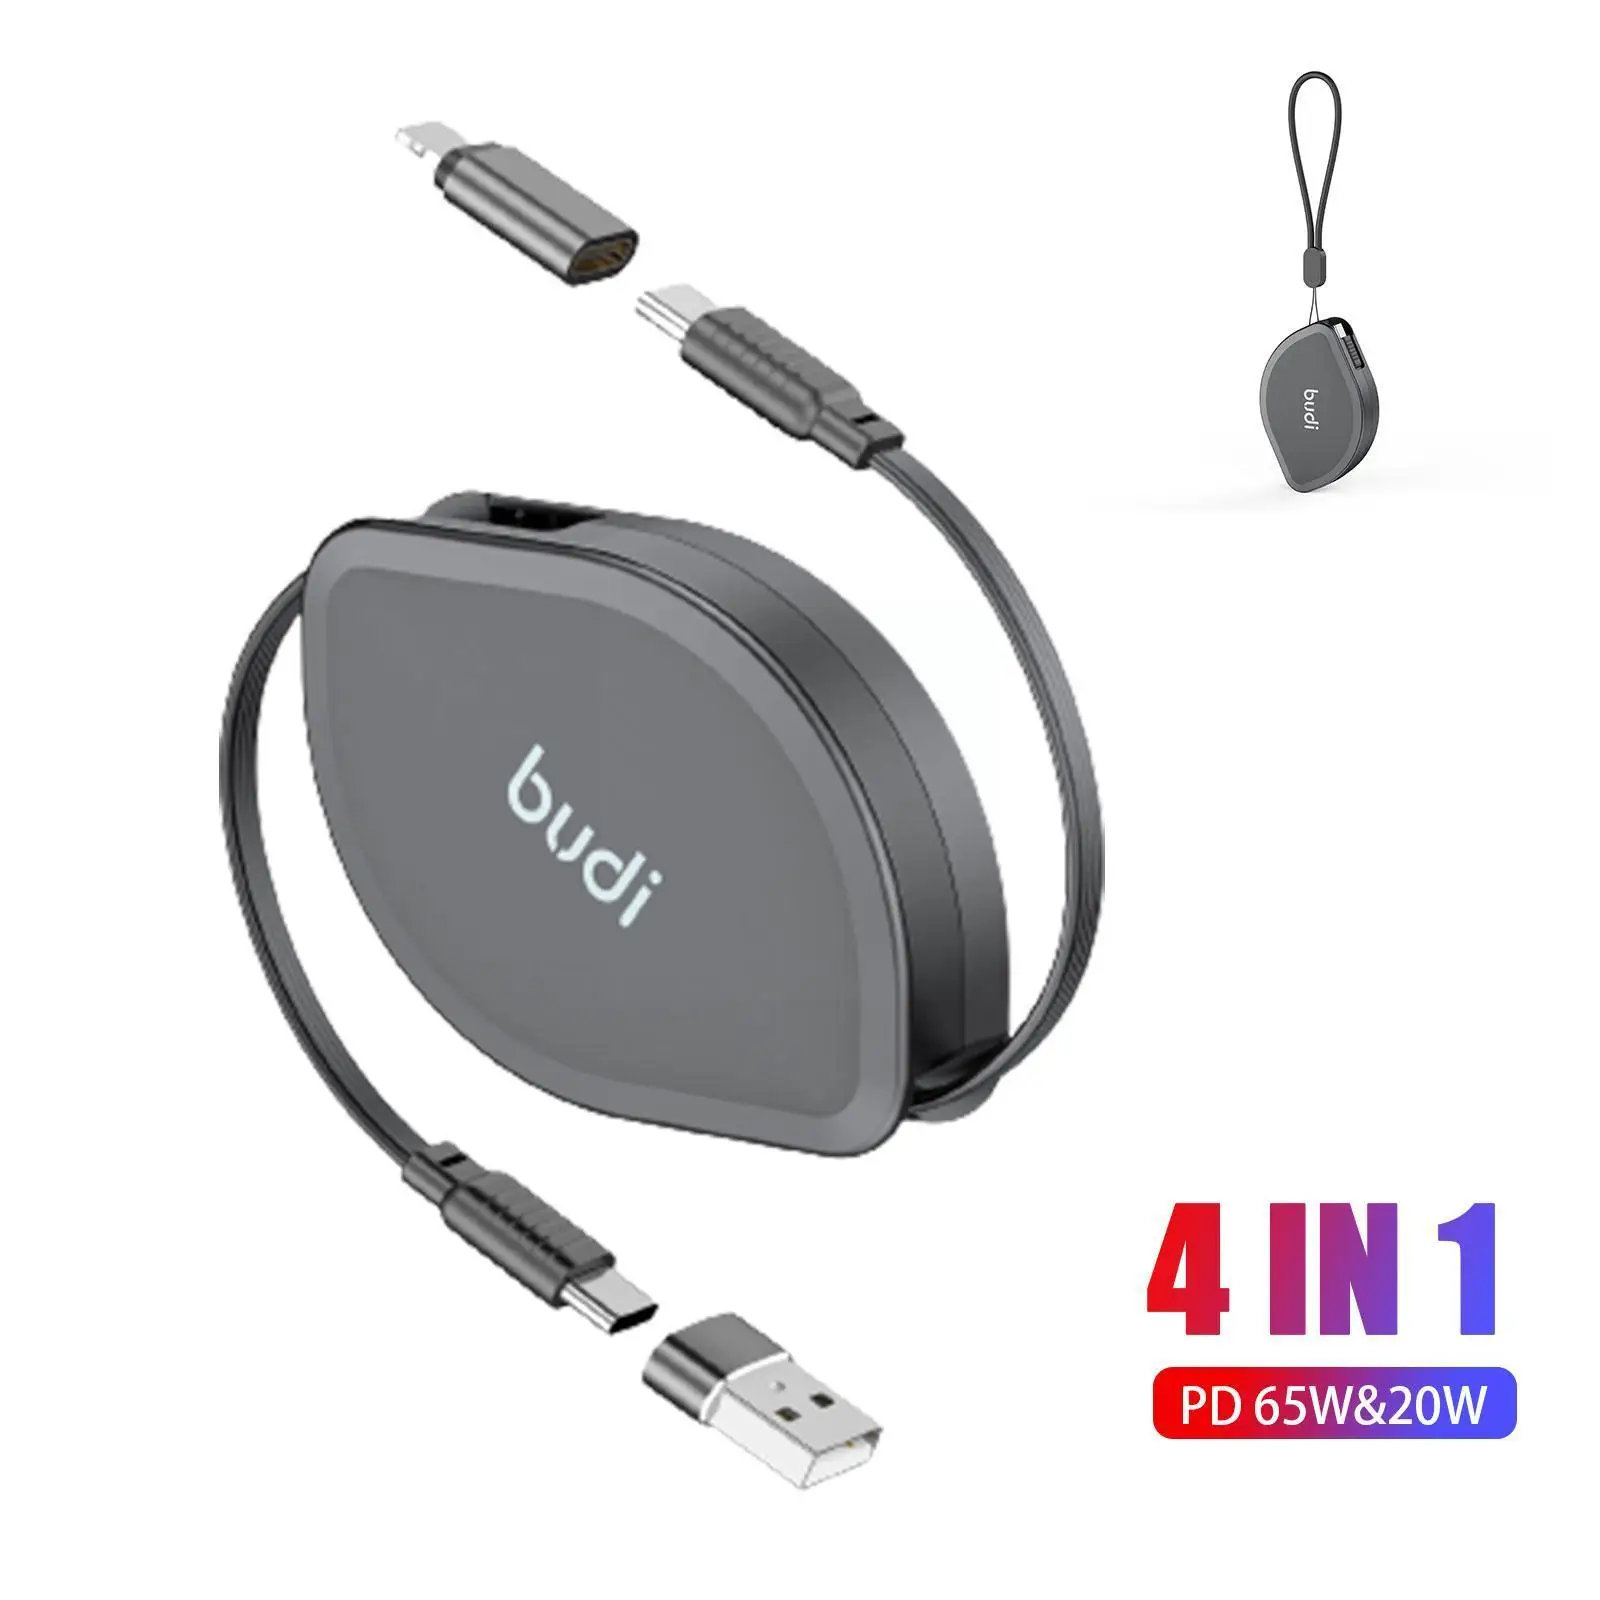 

Budi 4 In1 Pd 65w&20w Retractable Usb C Pd Type C High-speed Charge Sync Cable Fast Charging Mobile Phone Accessories For I I5t2